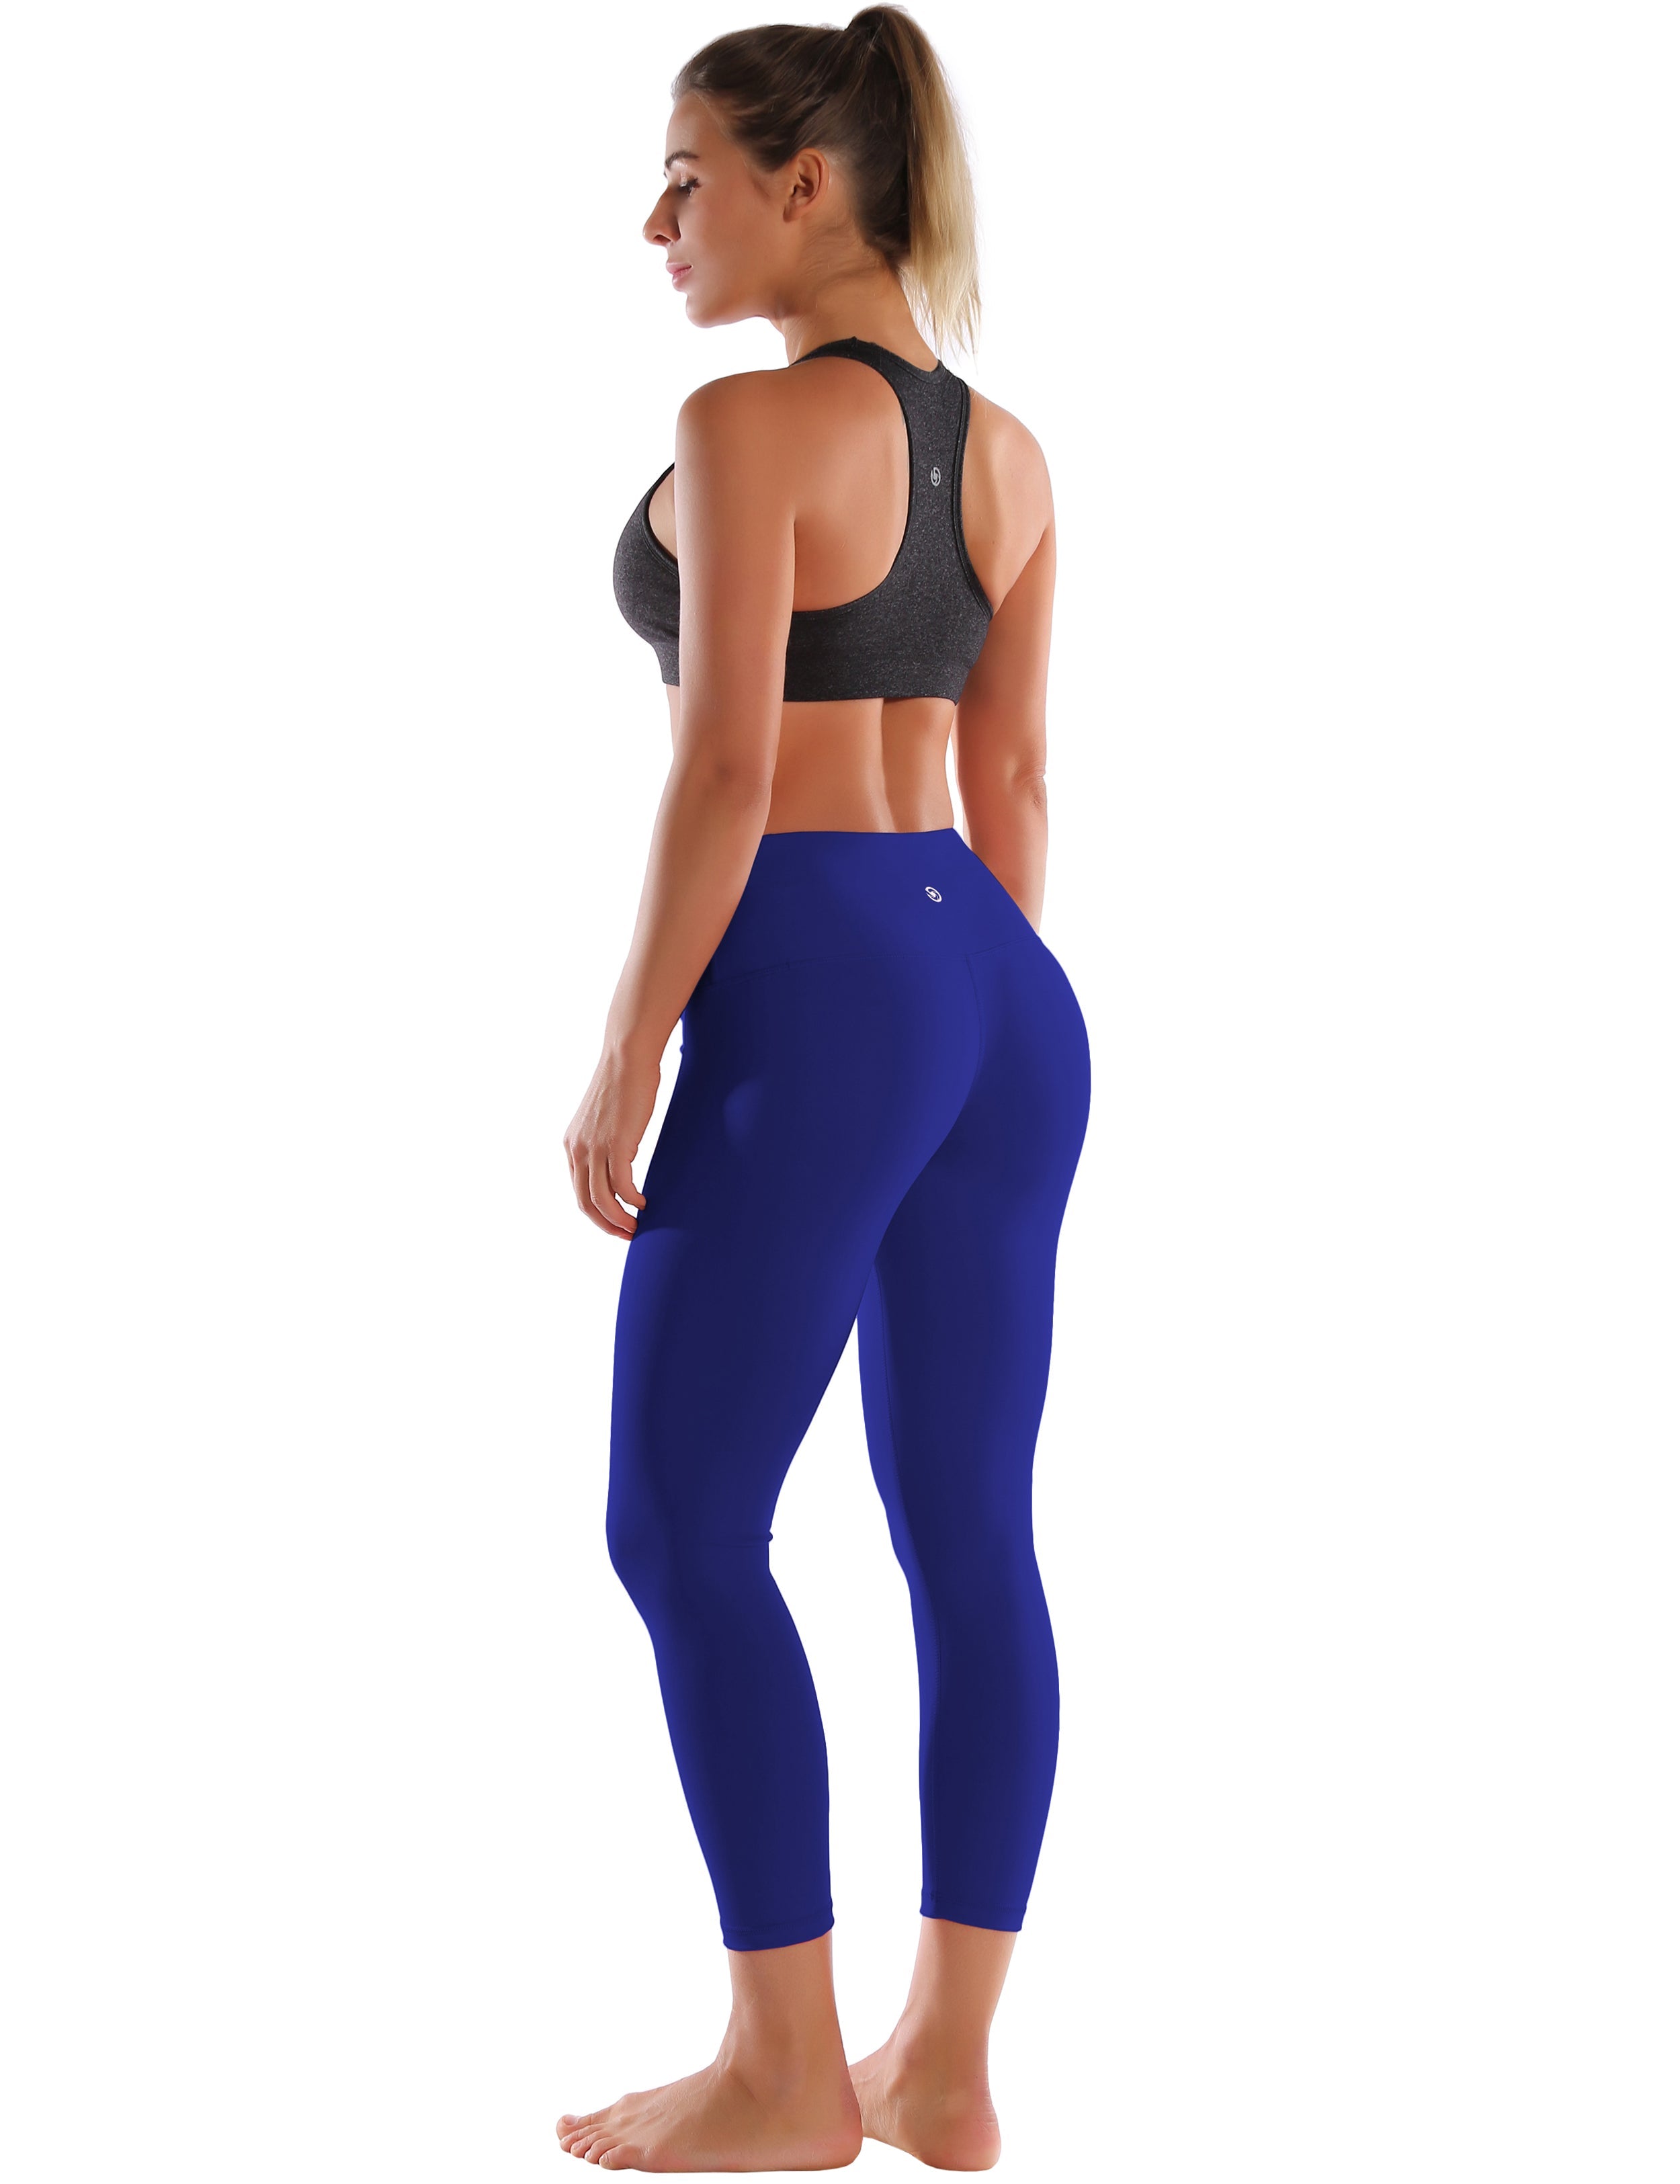 22" High Waist Crop Tight Capris navy 75%Nylon/25%Spandex Fabric doesn't attract lint easily 4-way stretch No see-through Moisture-wicking Tummy control Inner pocket